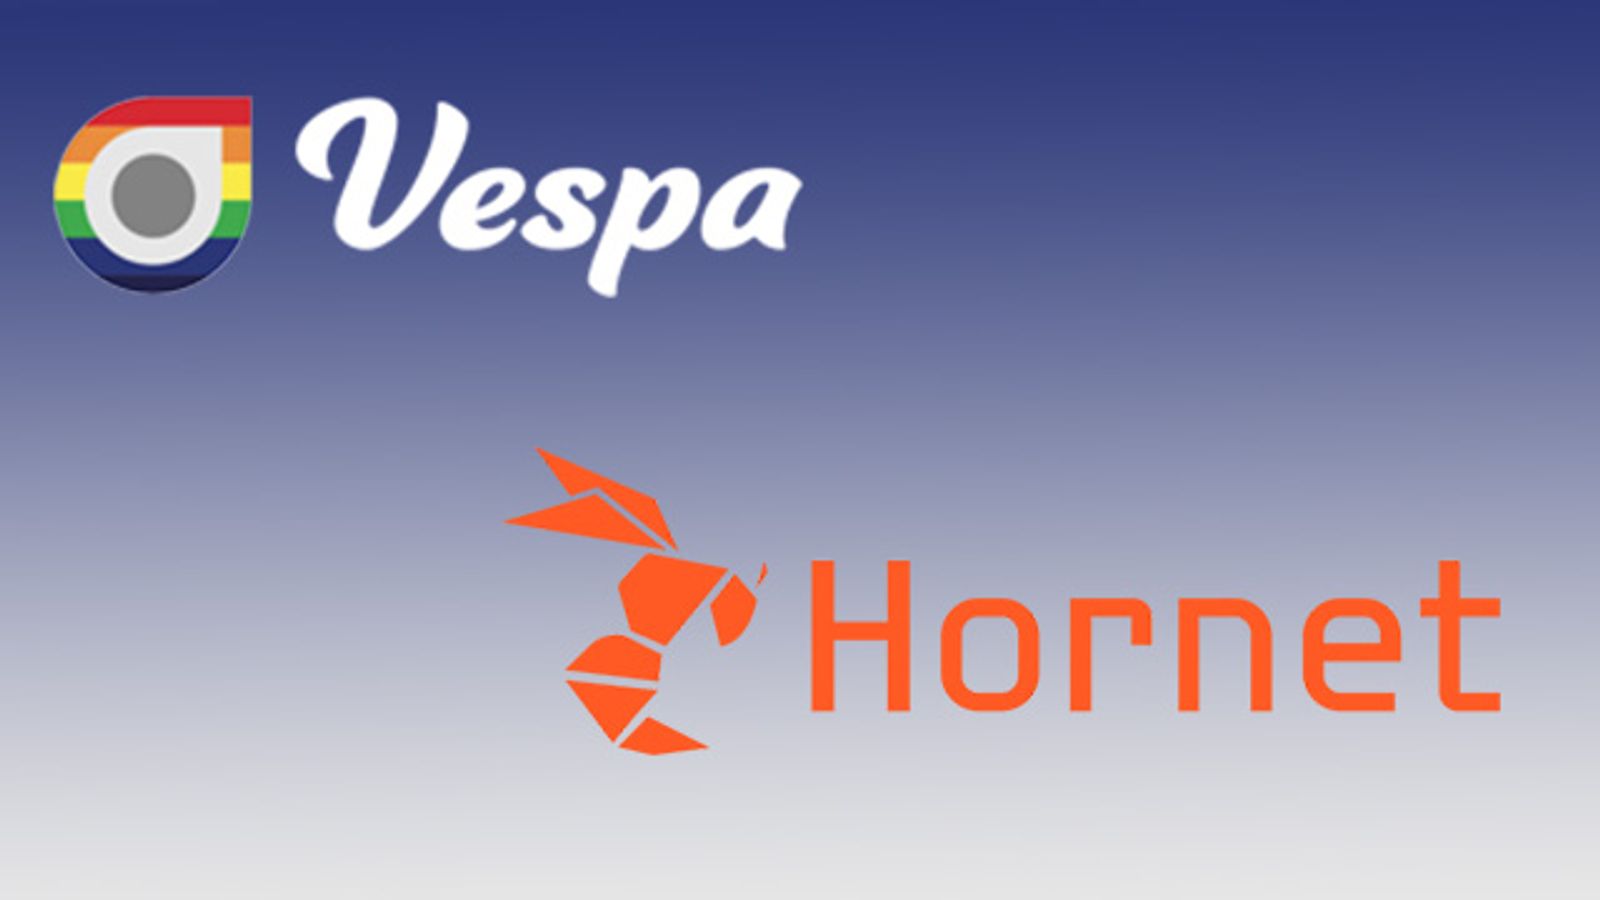 Hornet Acquires Vespa to Become Top Gay App